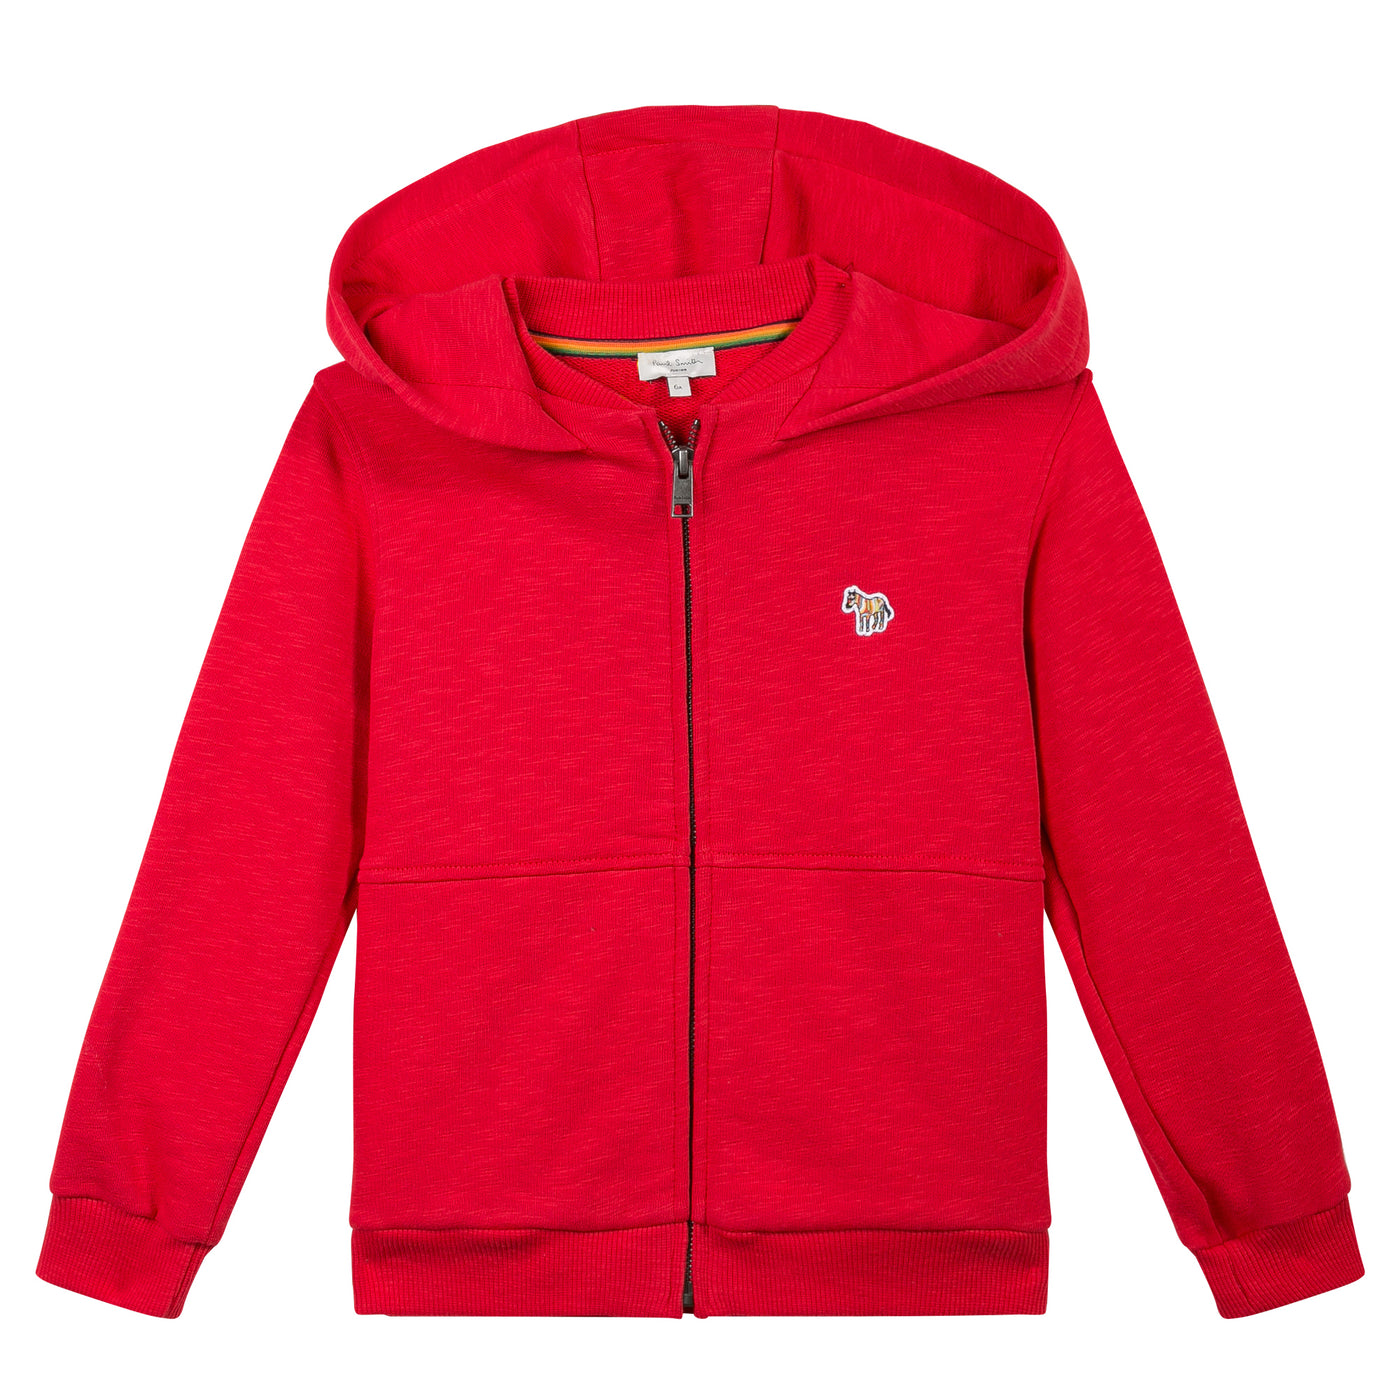 Paul Smith Junior Kids "Zebra" Icon Jacket with Hood in Red 5K17512-362